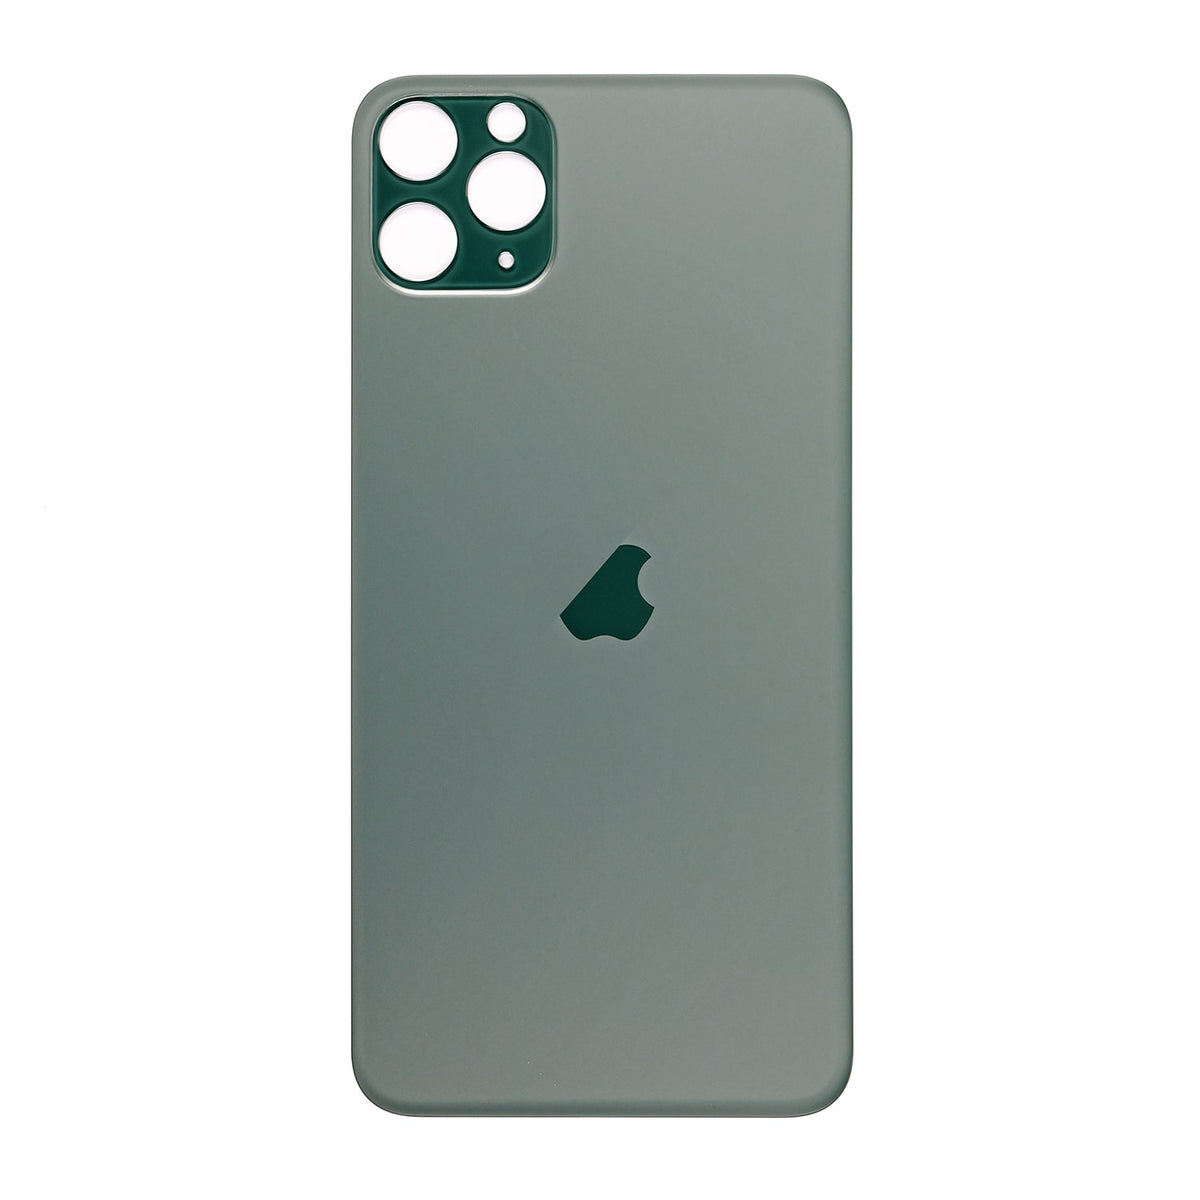 BACK COVER - MIDNIGHT GREEN FOR IPHONE 11 PRO MAX